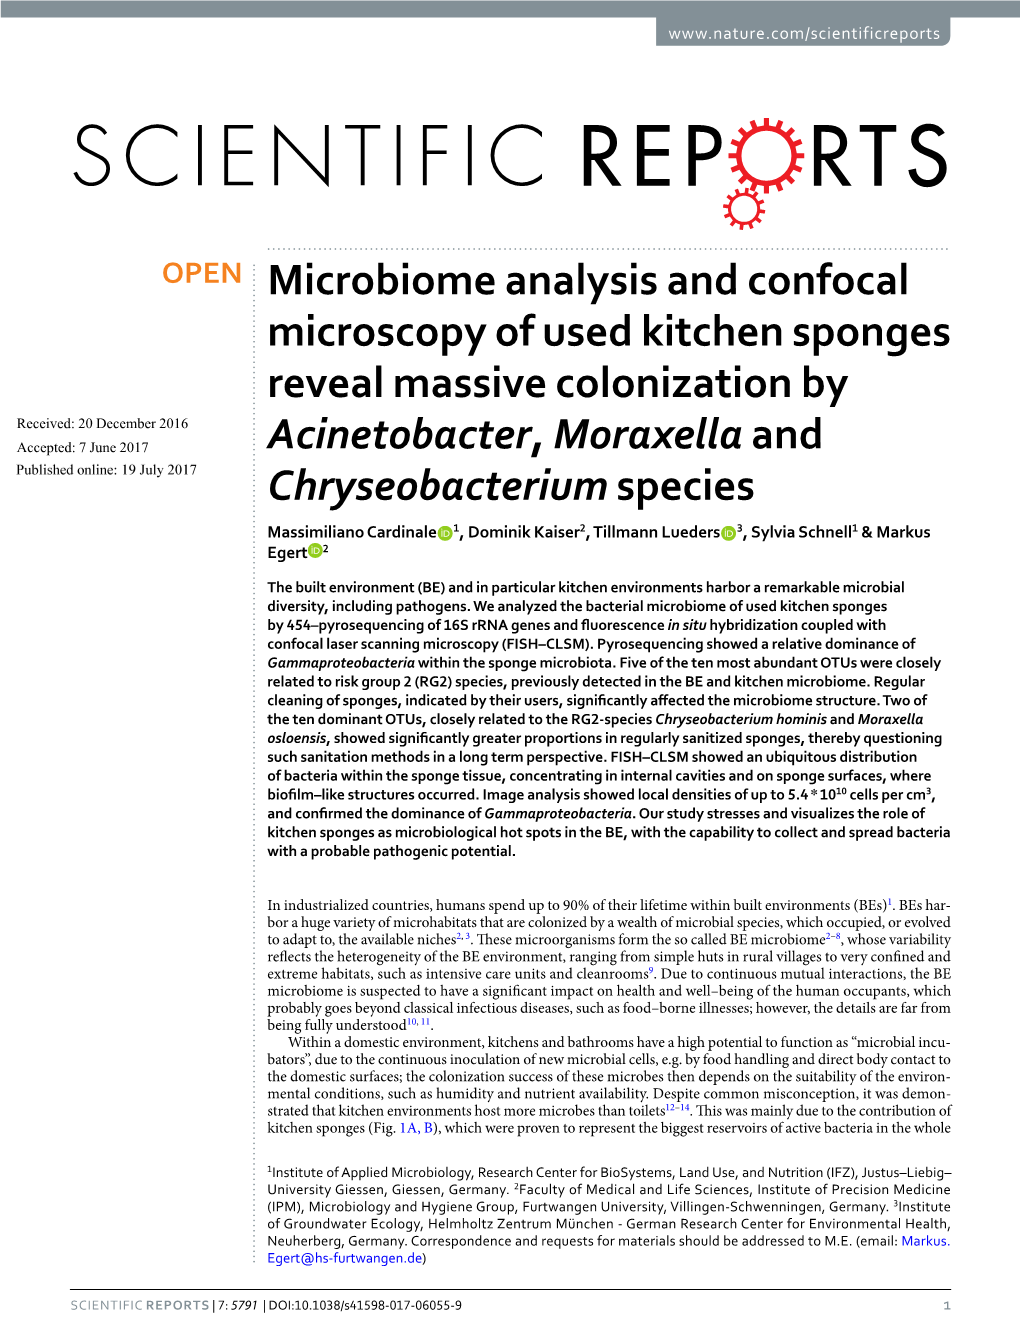 Microbiome Analysis and Confocal Microscopy of Used Kitchen